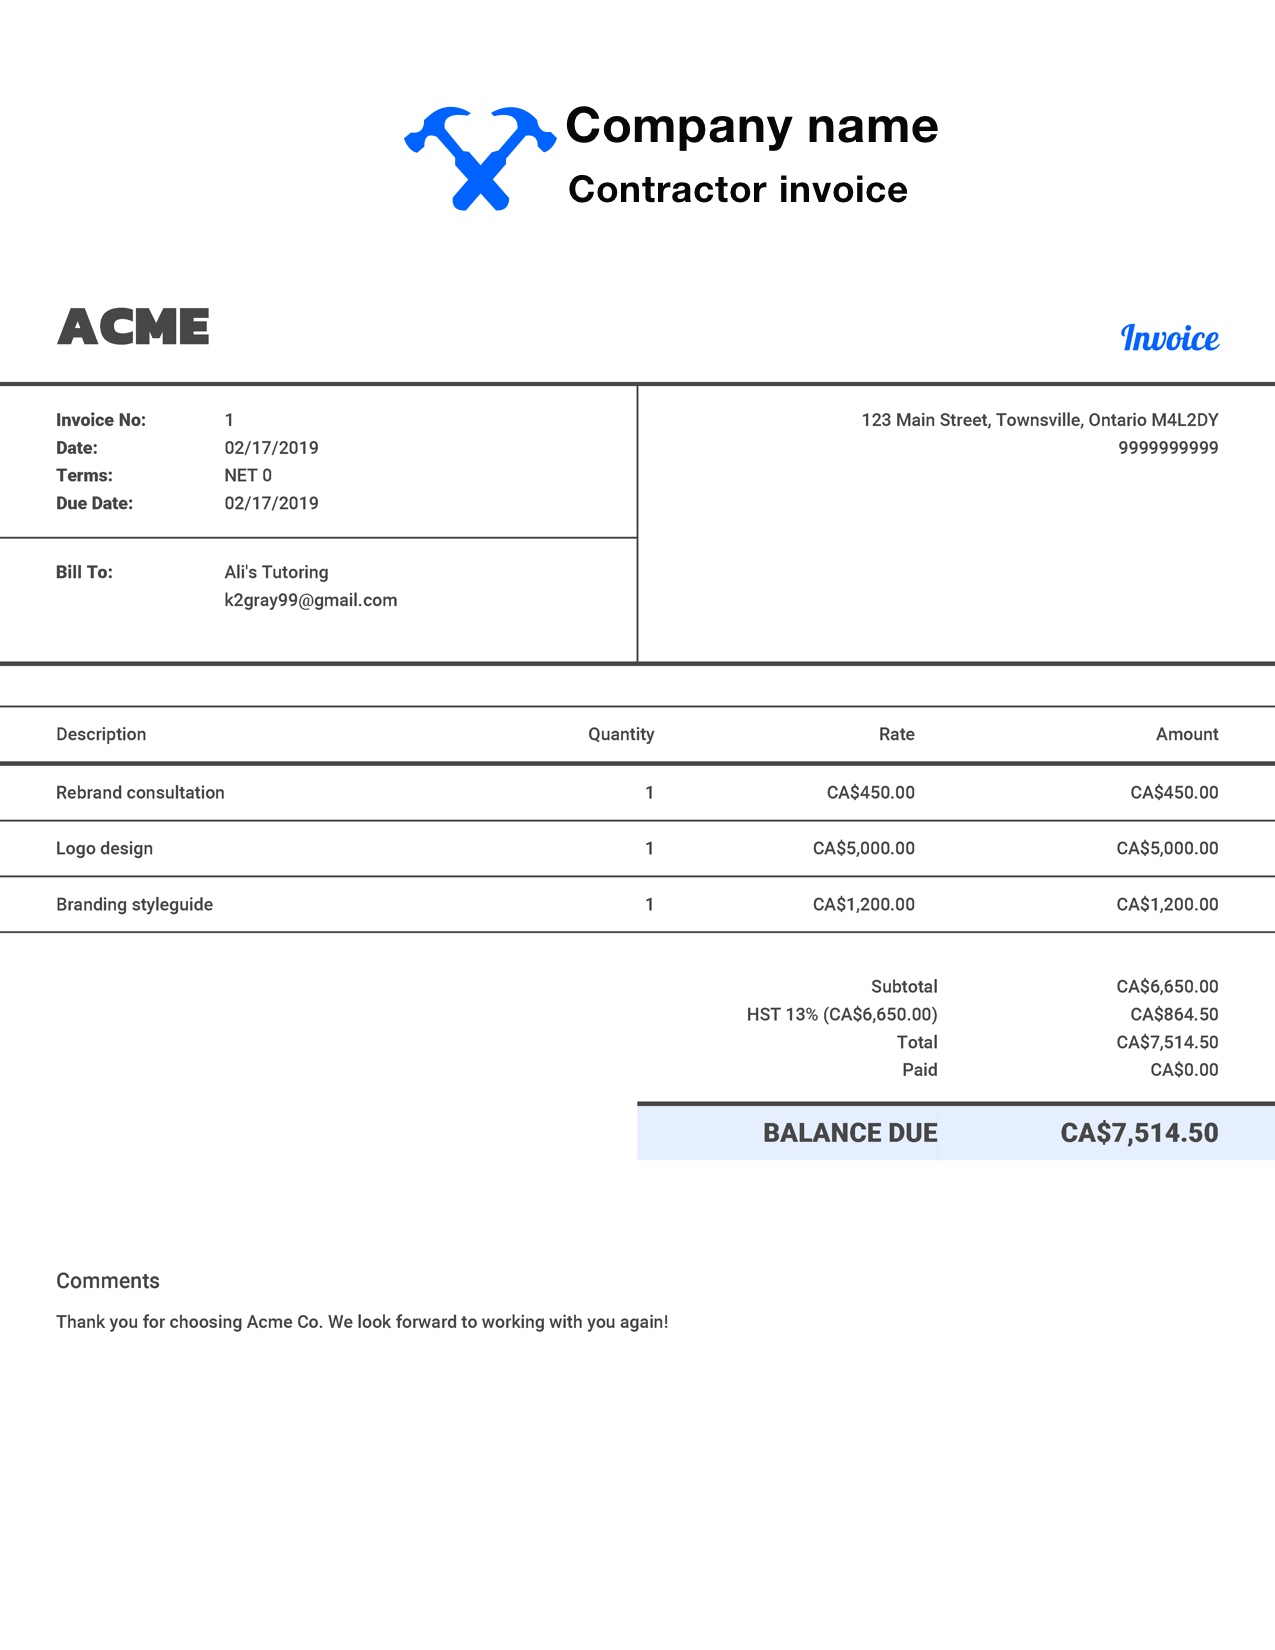 Free Contractor Invoice Template. Customize and Send in 90 Seconds